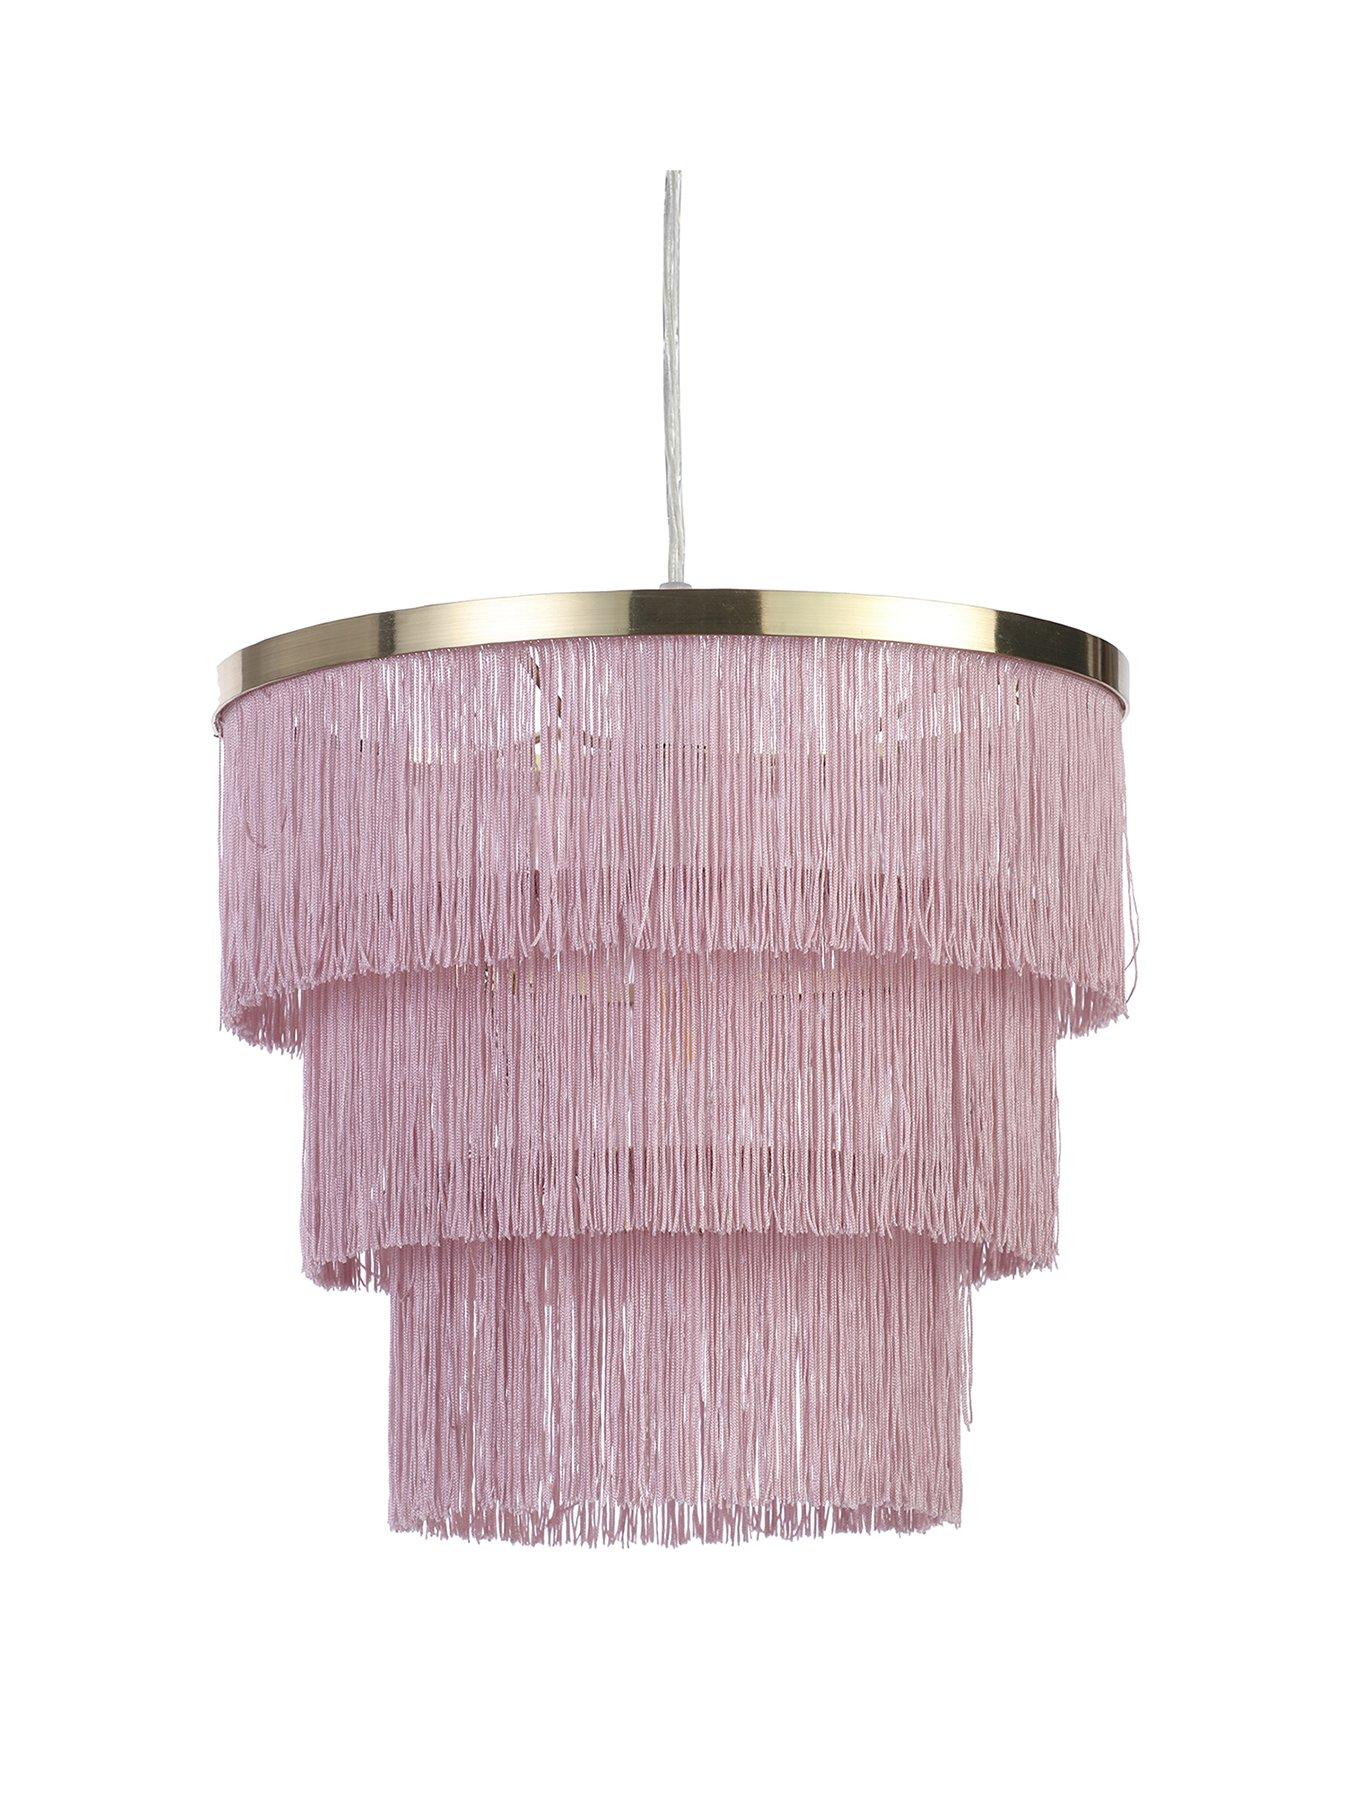 Pink Ceiling Light Shade Pink Cotton Fabric Easy Fit Ceiling Lightshade Modern 25cm Drum Shade